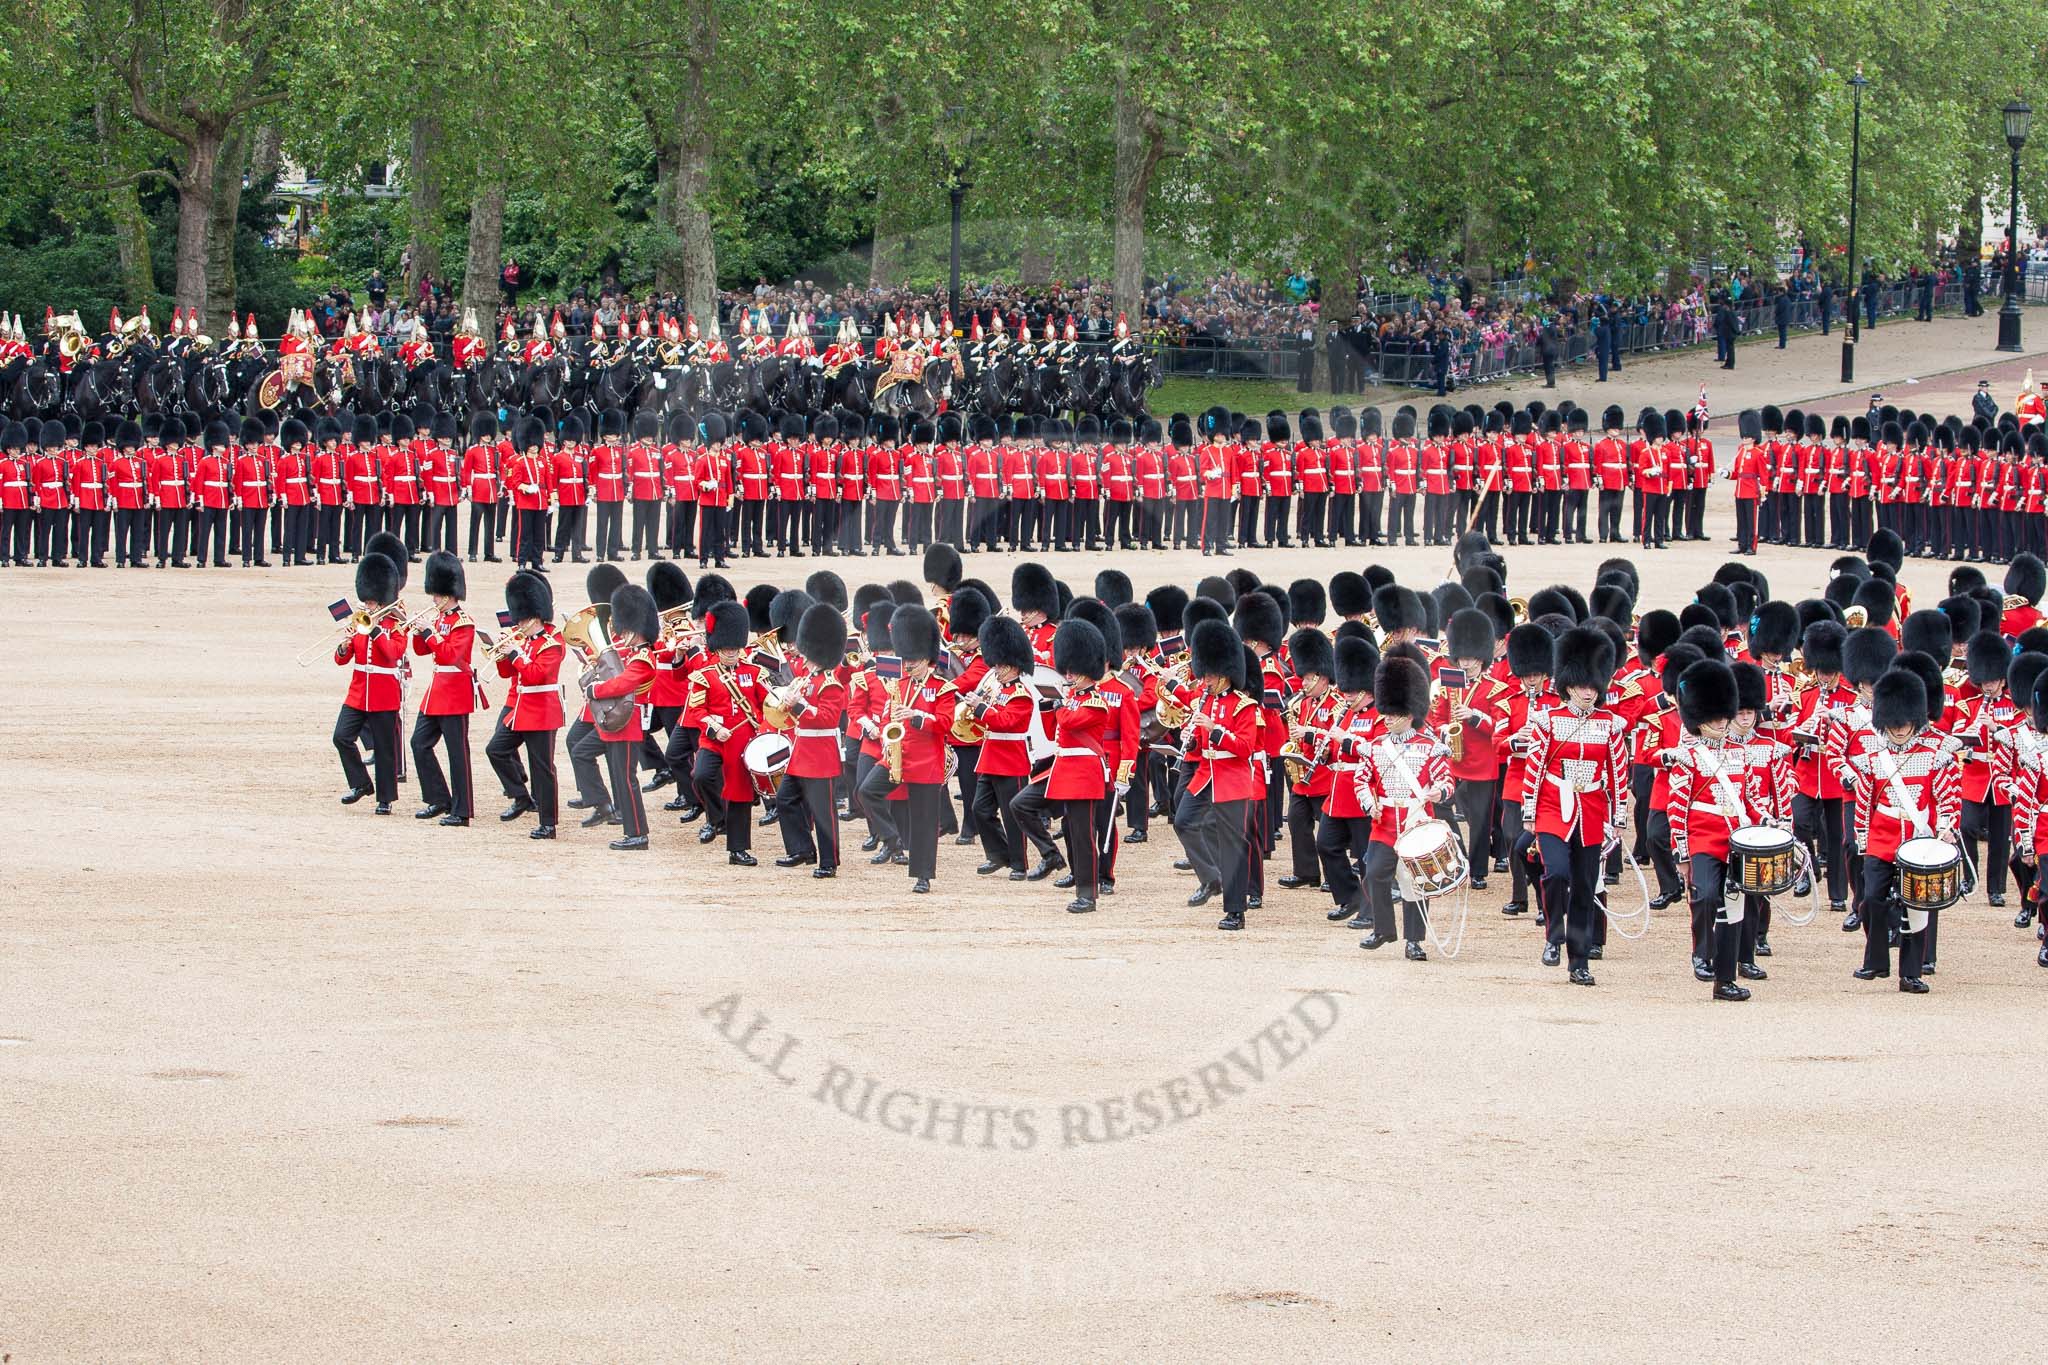 The Colonel's Review 2012: The legendary spinwheel?.
Horse Guards Parade, Westminster,
London SW1,

United Kingdom,
on 09 June 2012 at 11:14, image #252